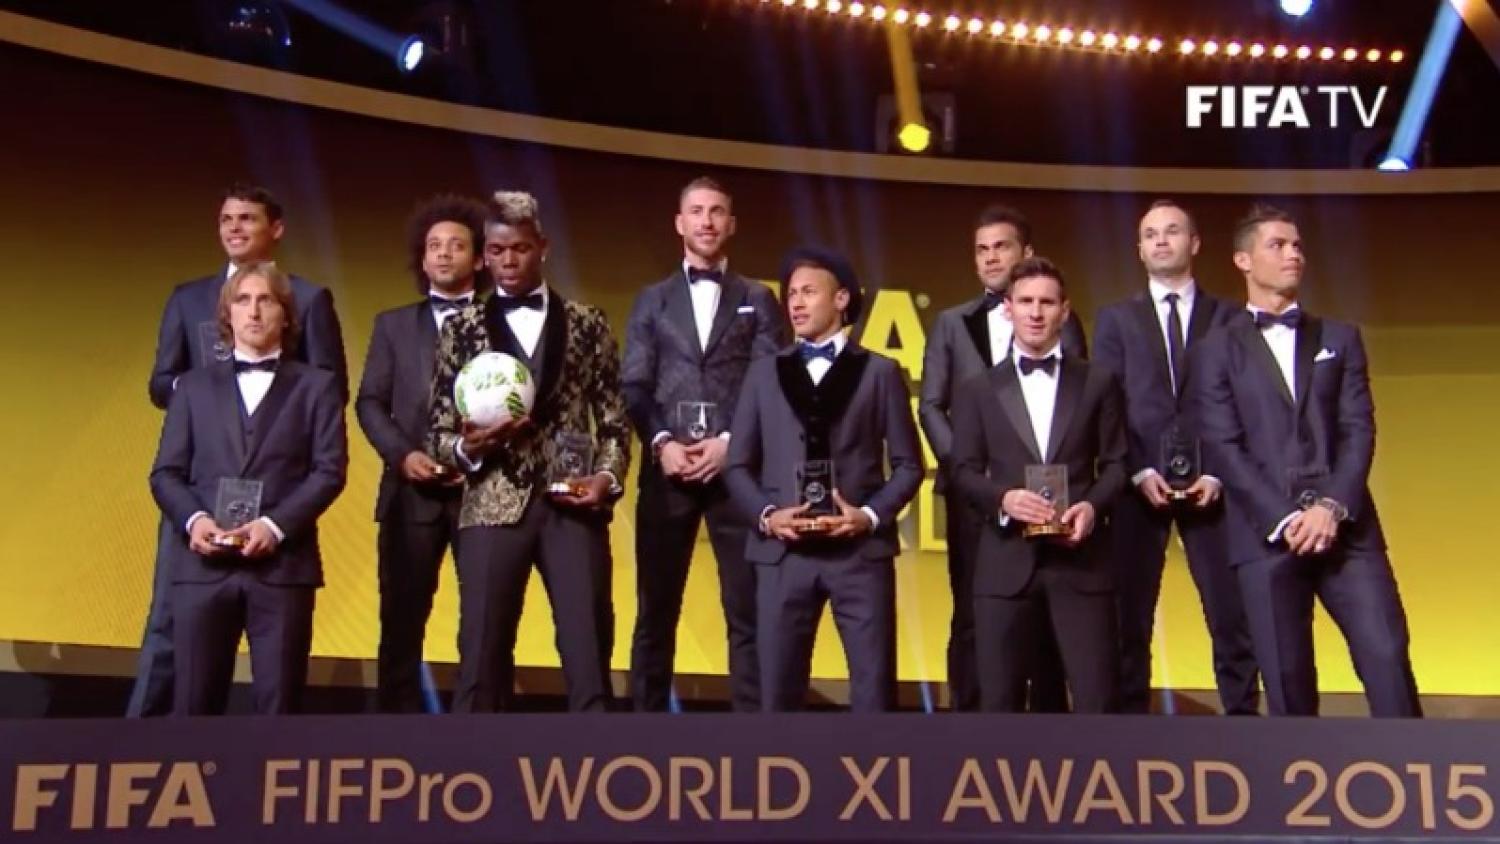 The FIFA FIFPro World XI Winners From The 2015 Ballon d’Or Ceremony